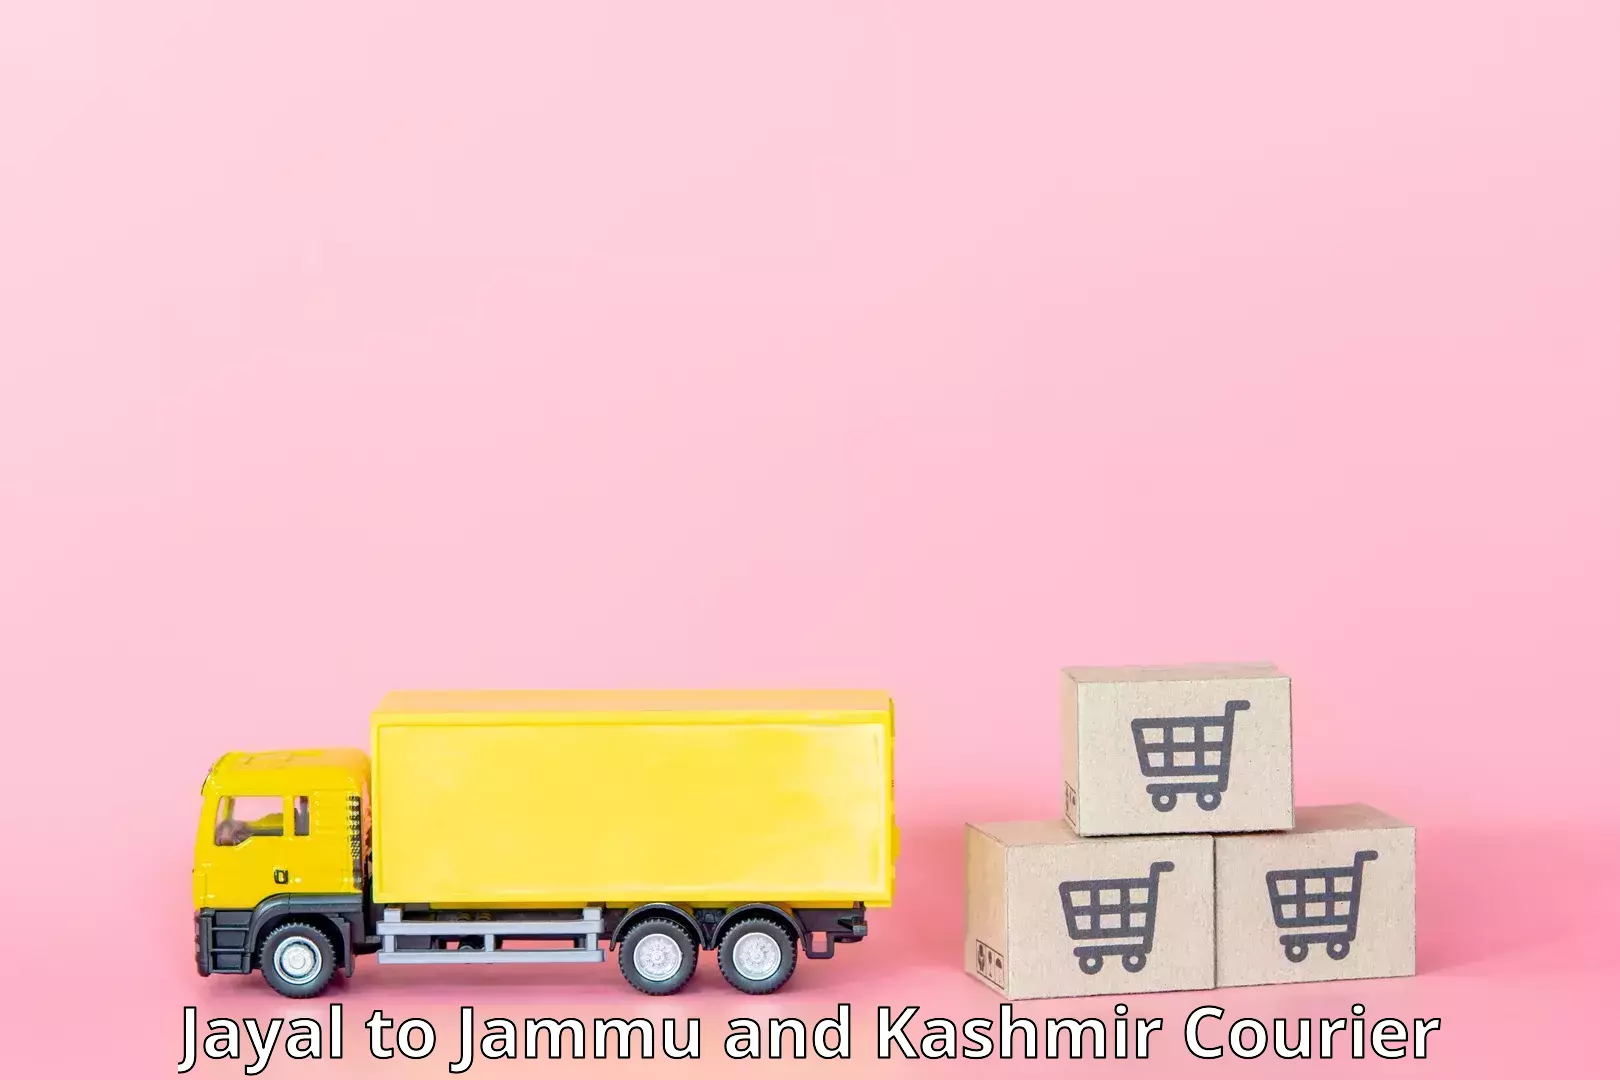 State-of-the-art courier technology Jayal to Jammu and Kashmir